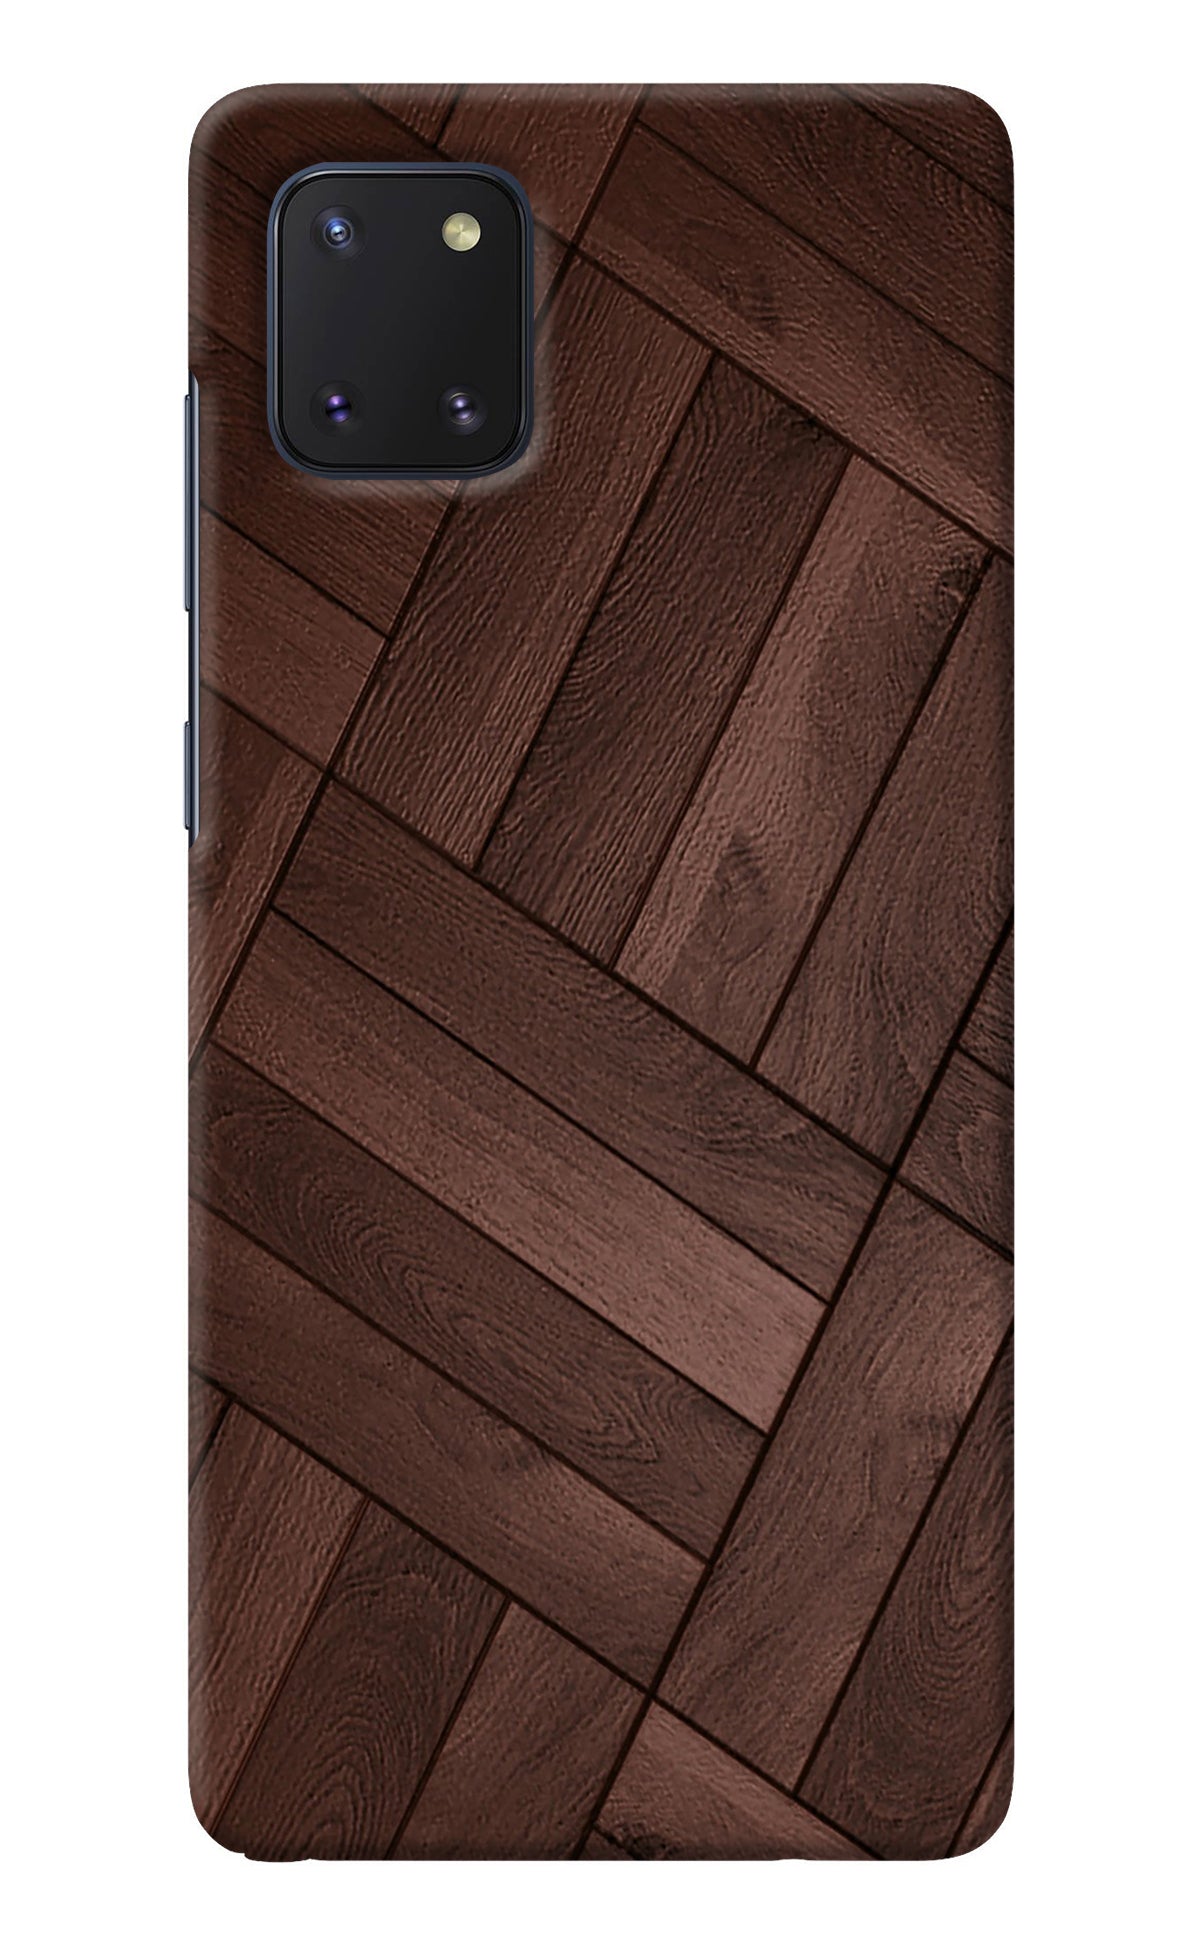 Wooden Texture Design Samsung Note 10 Lite Back Cover